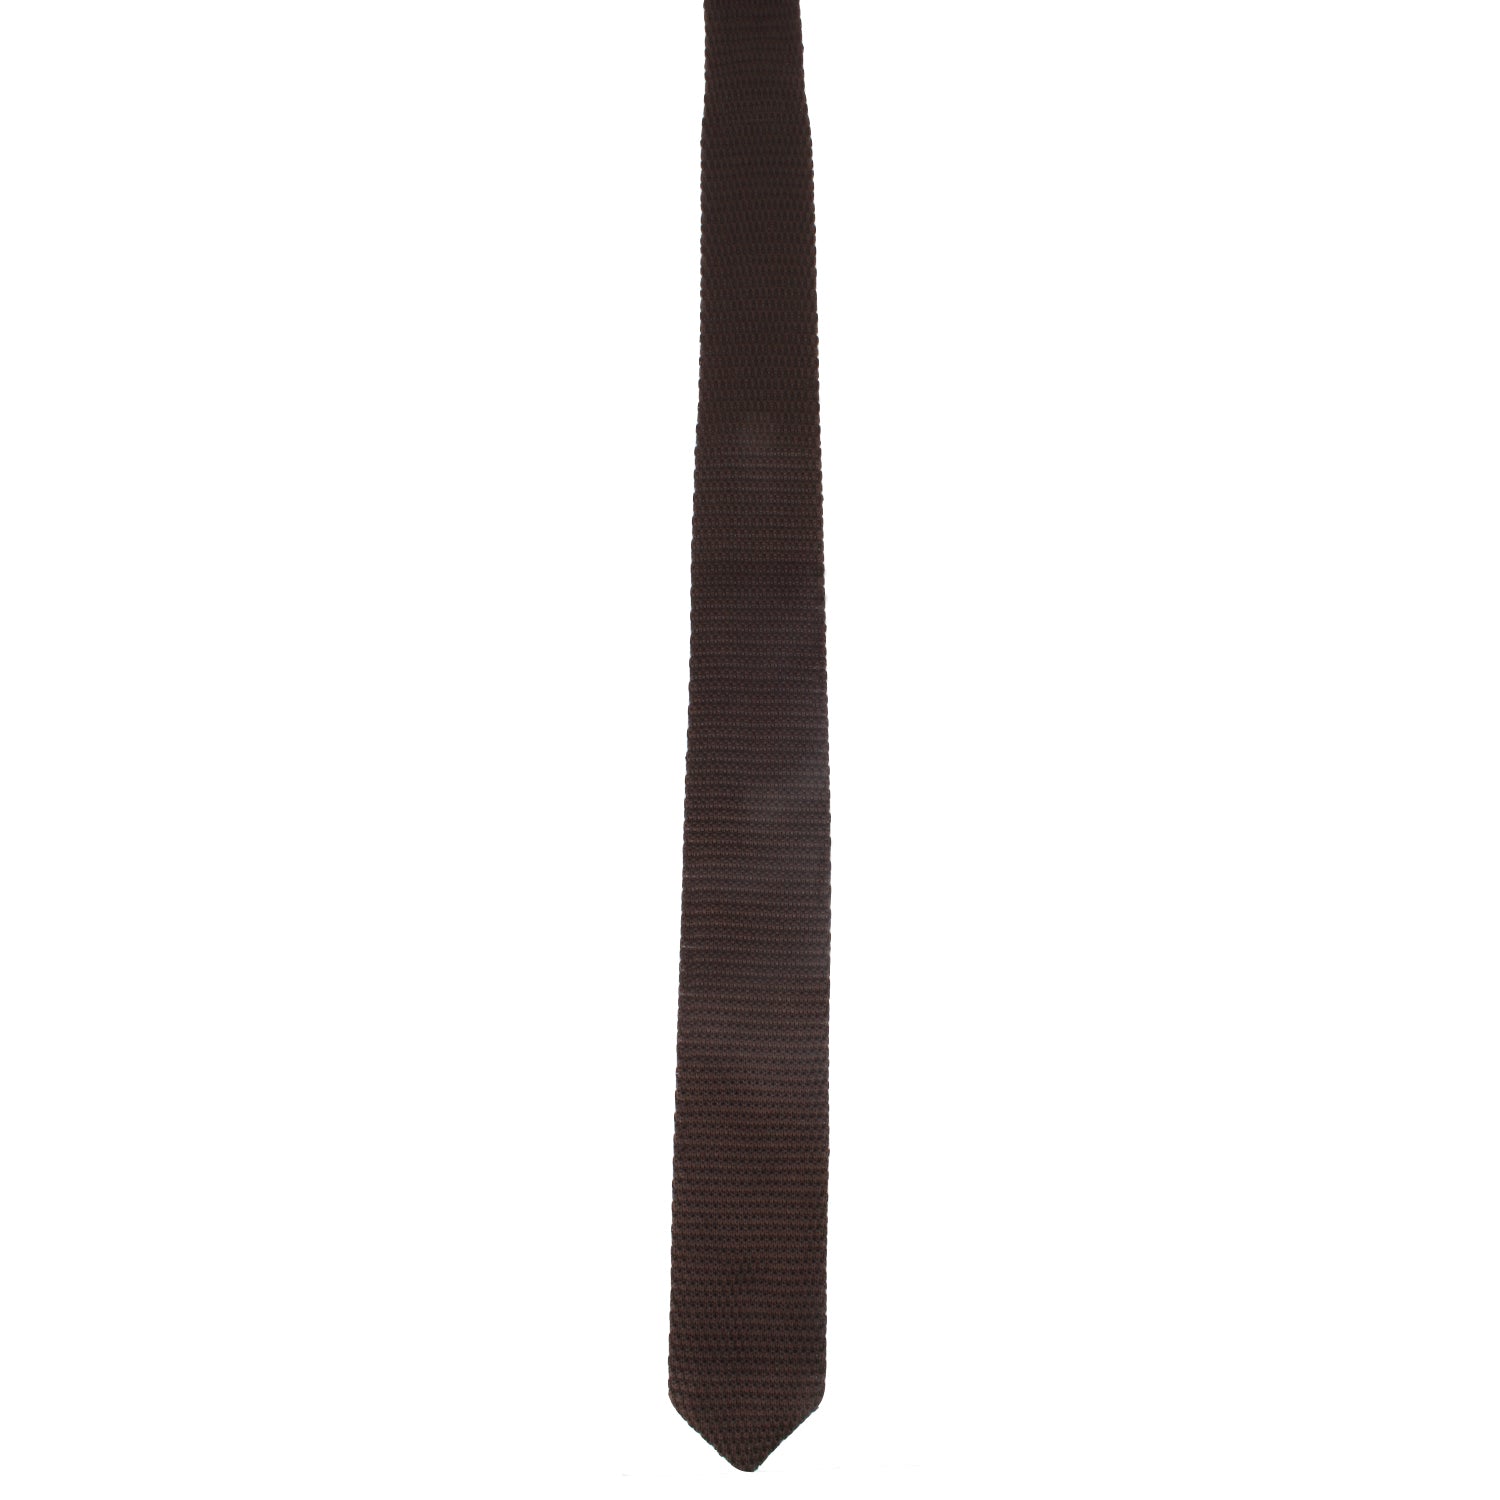 A Brown Knitted Skinny Tie on a white background.